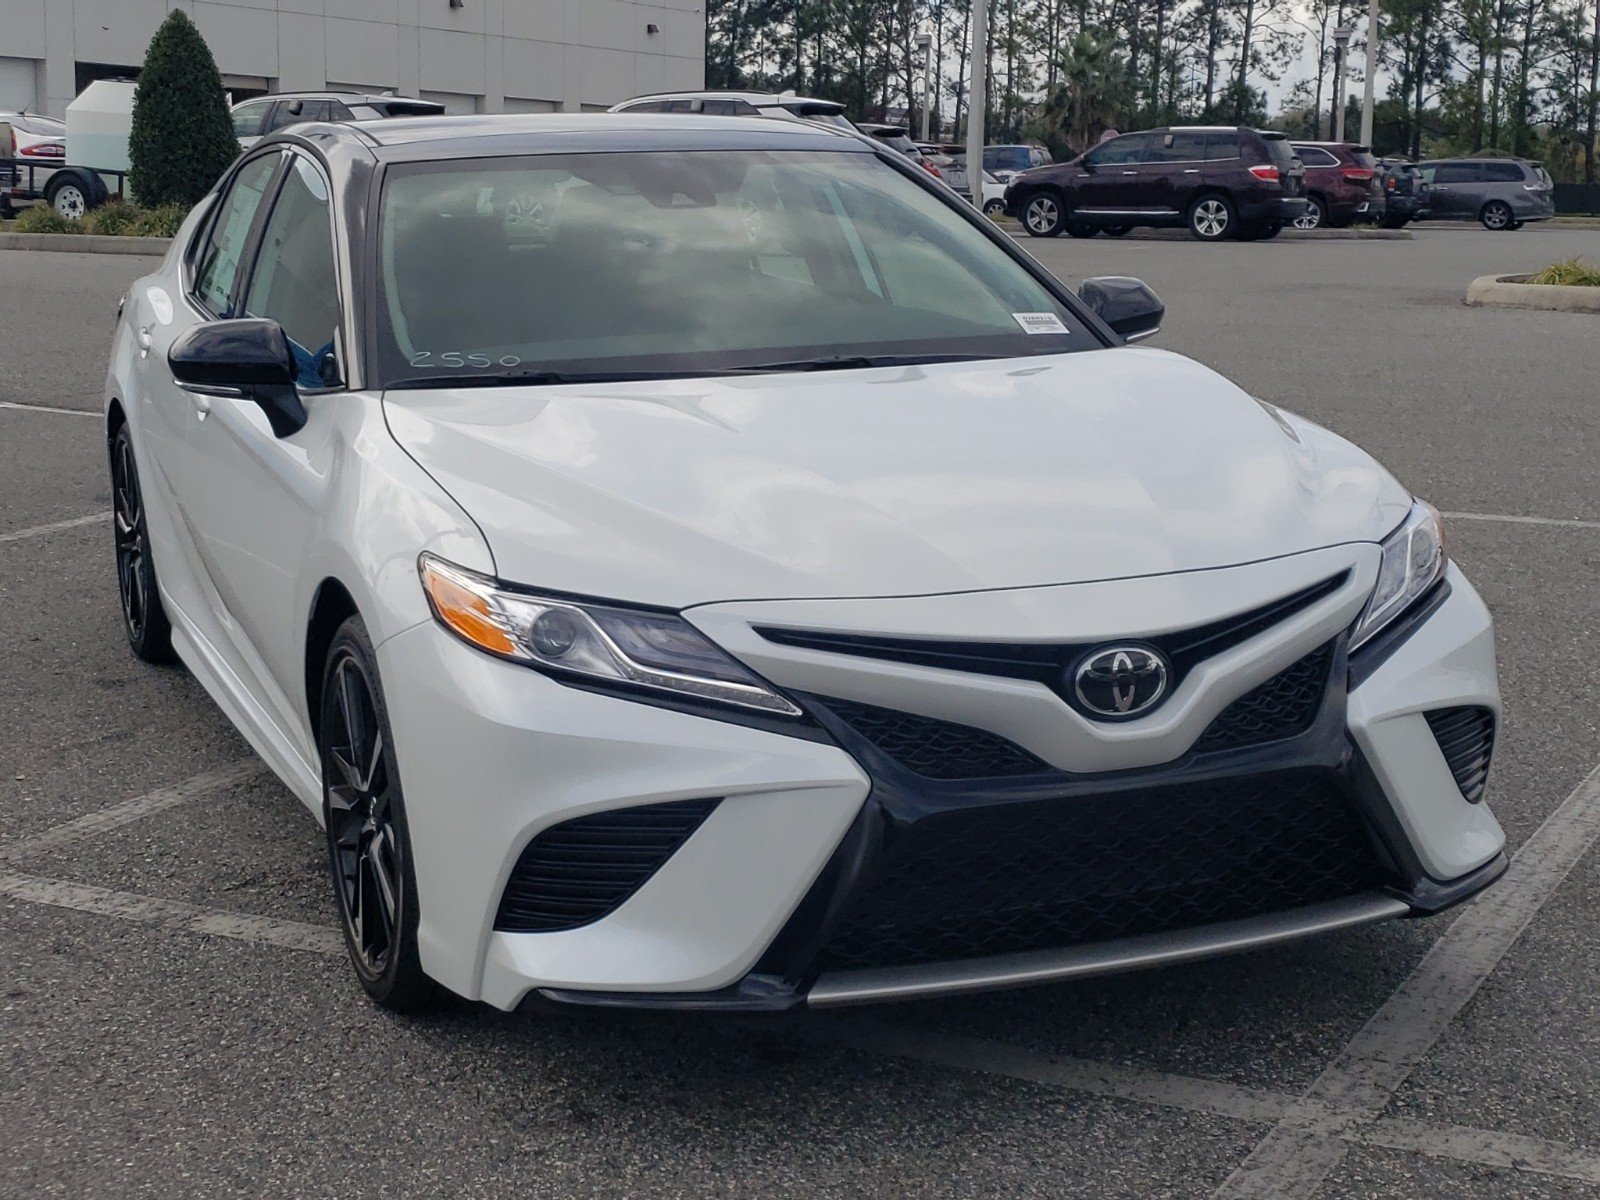 New 2020 Toyota Camry XSE V6 4dr Car in Clermont #0250210 | Toyota of Clermont